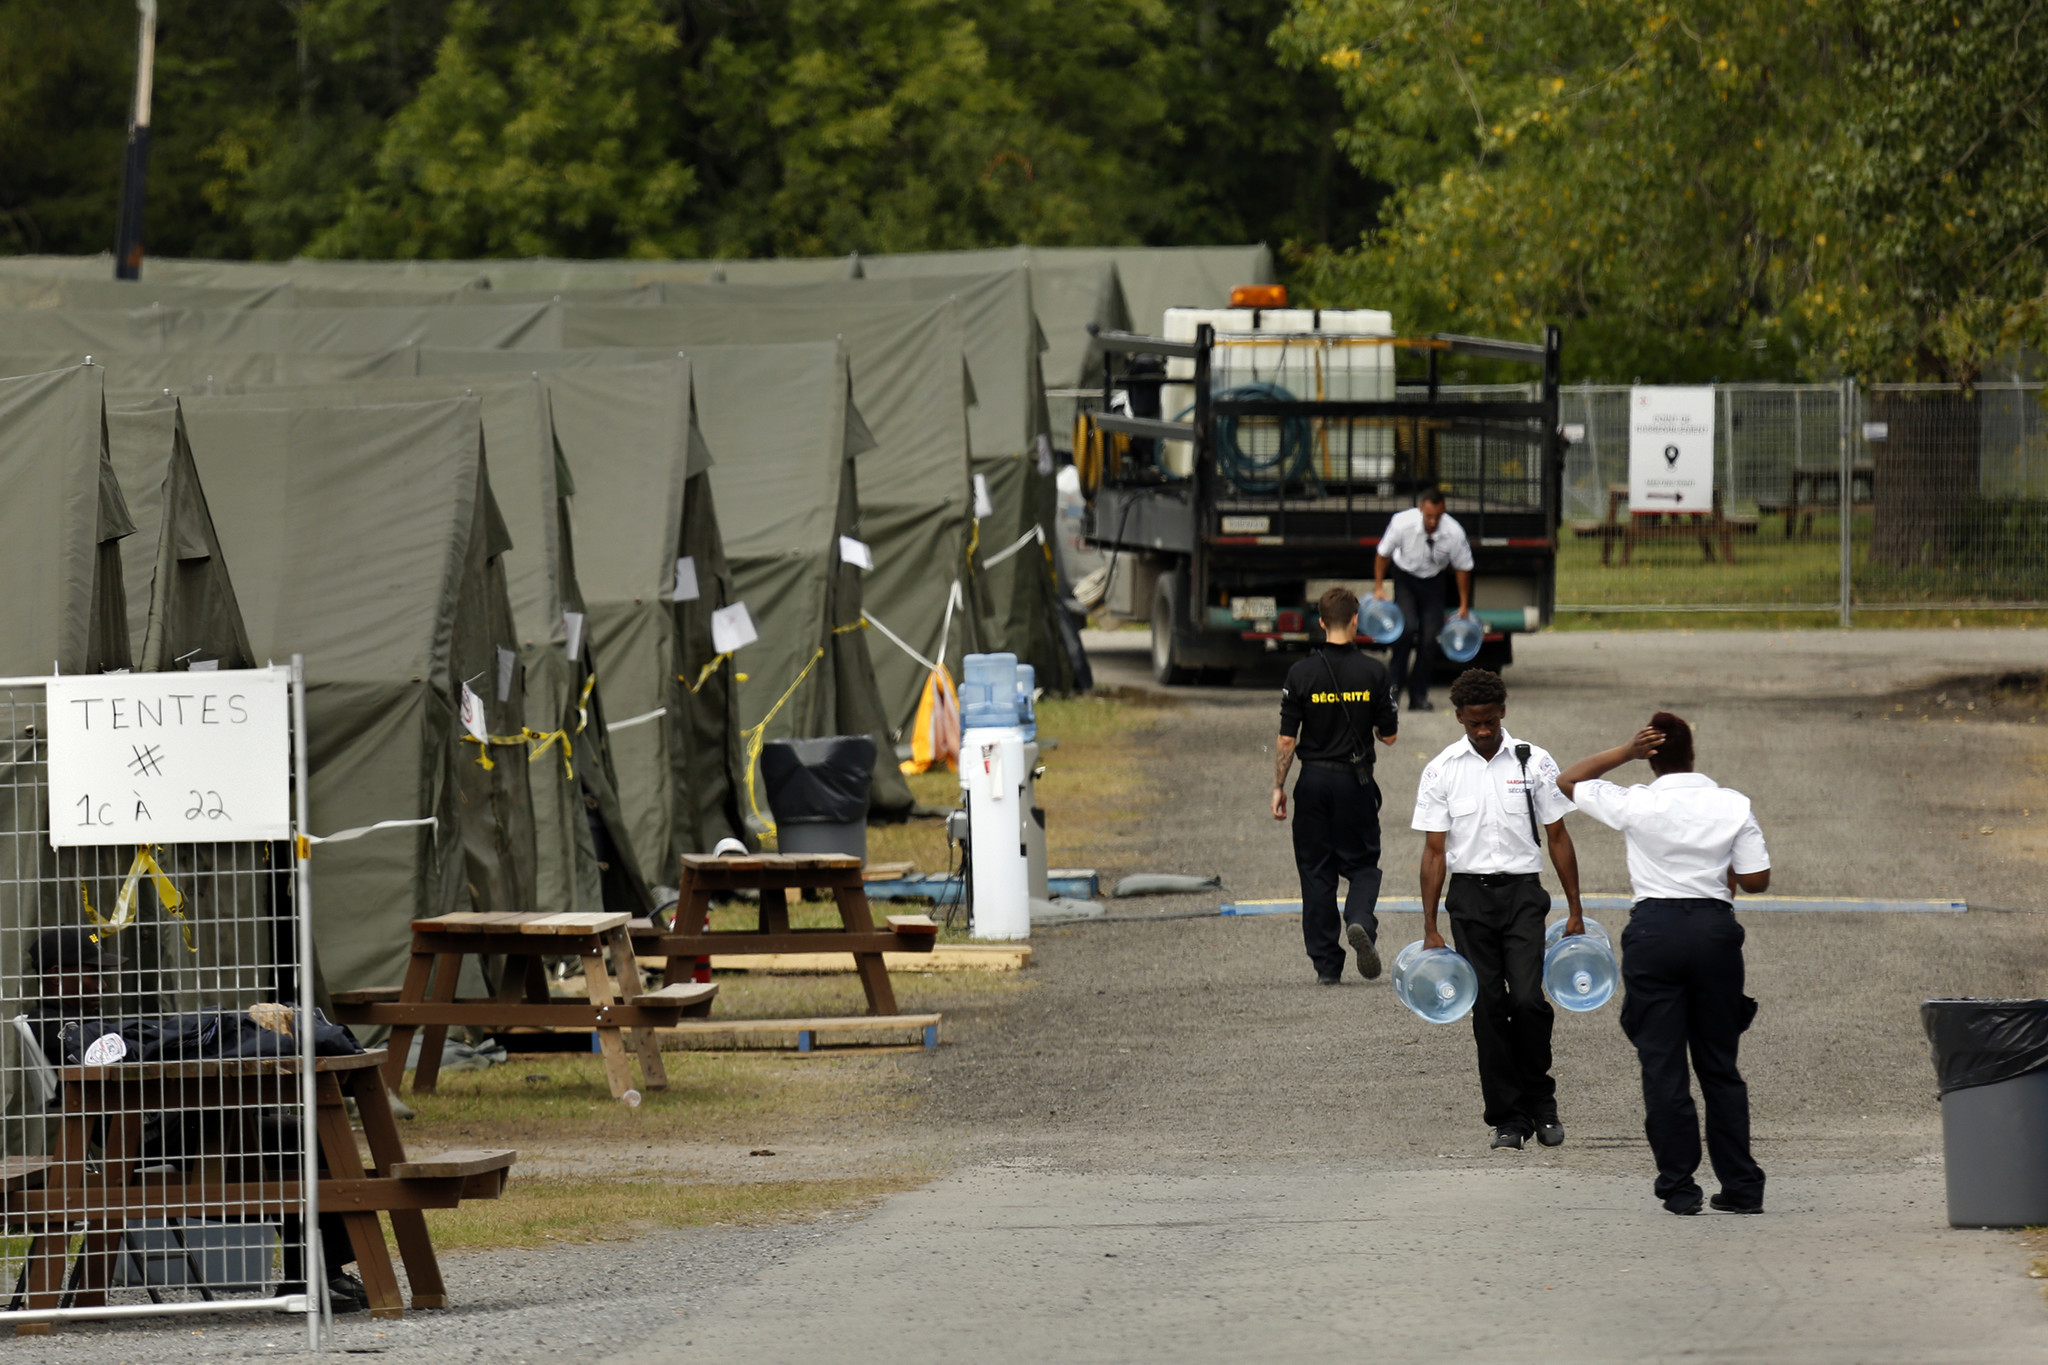 Members of the Canadian armed forces set up a tent village to house migrants while they wait to file asylum applications at the official port of entry in St. Bernard de Lacolle.